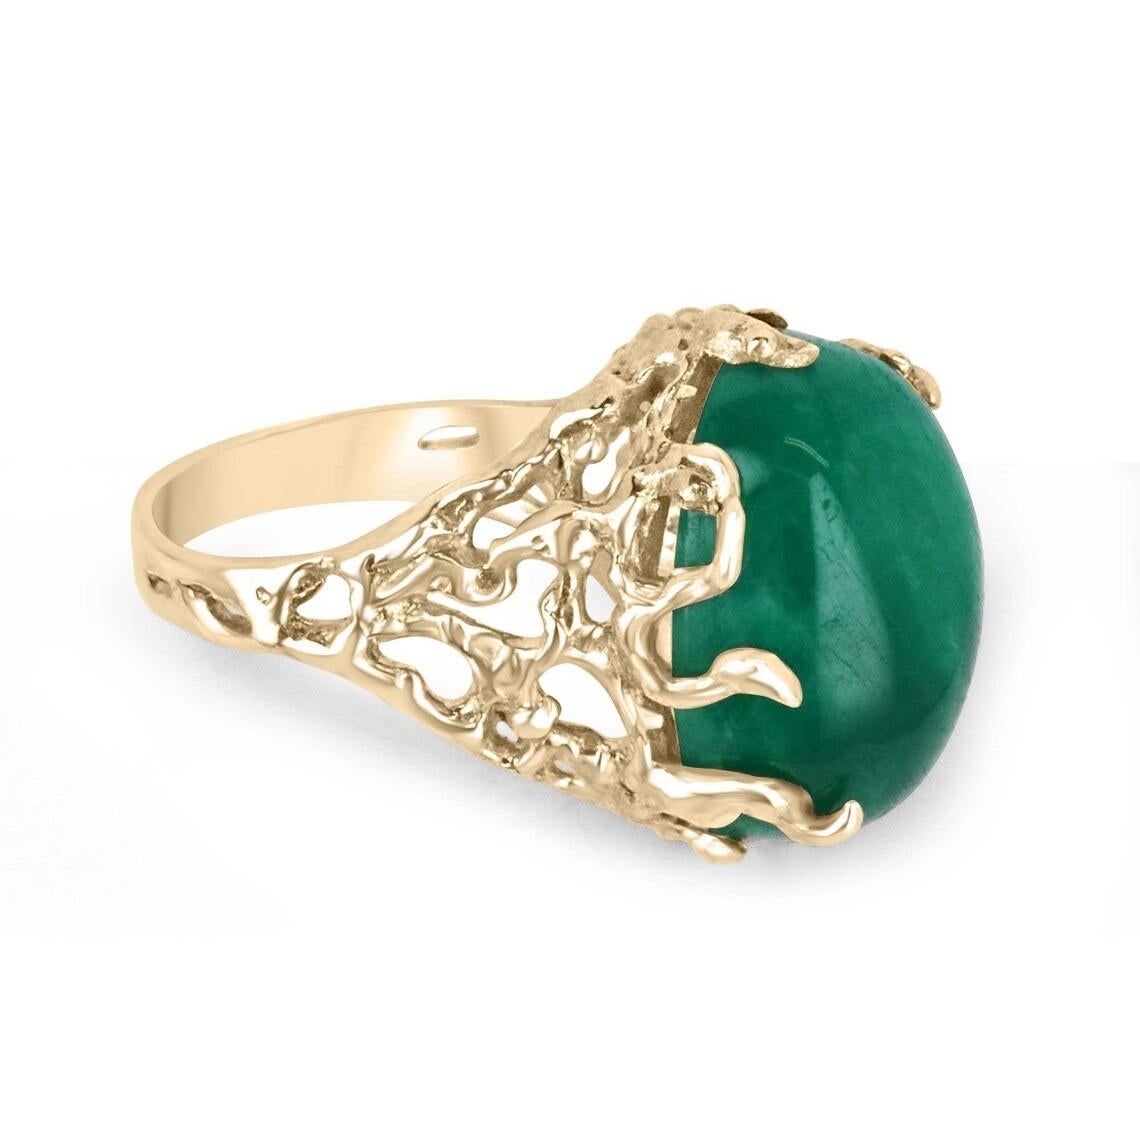 This impressive solitaire ring features a stunning centerpiece in the form of a huge 19-carat oval cabochon cut emerald from Colombia, prized for producing some of the world's most beautiful emeralds. The emerald displays a rich, dark green color